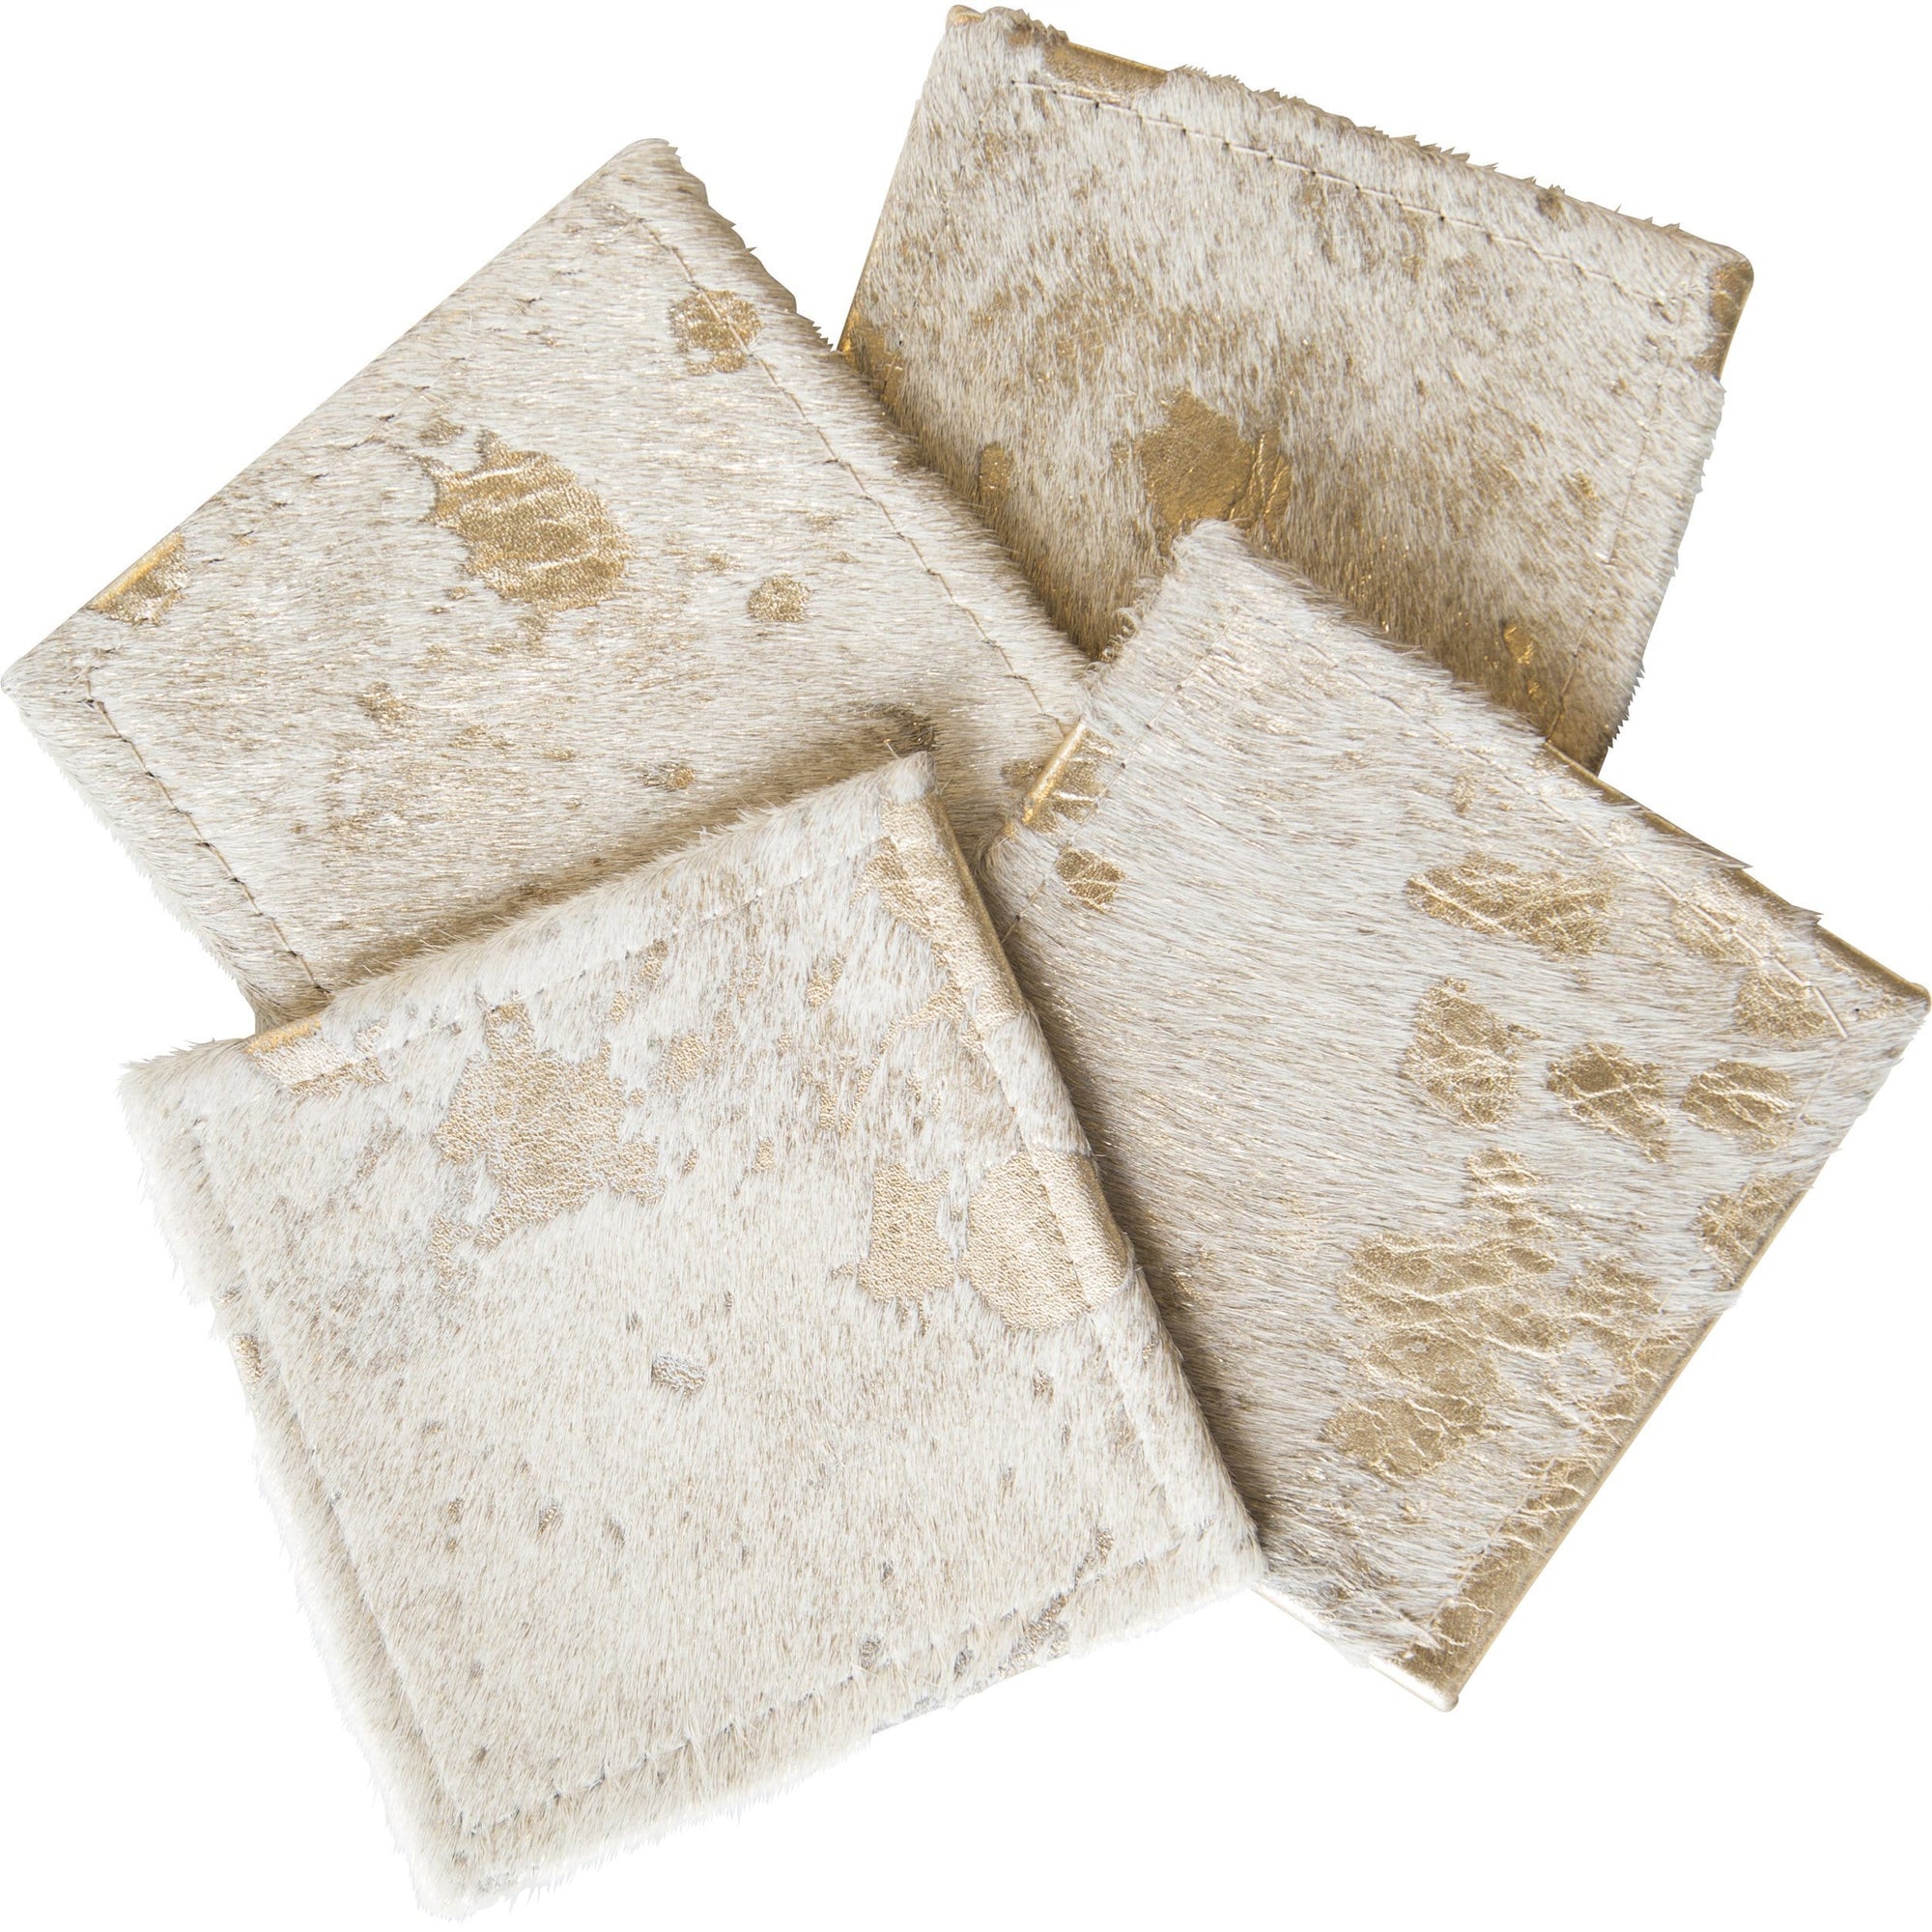 Cowhide Coaster Set of 4 - Accessorize In Style